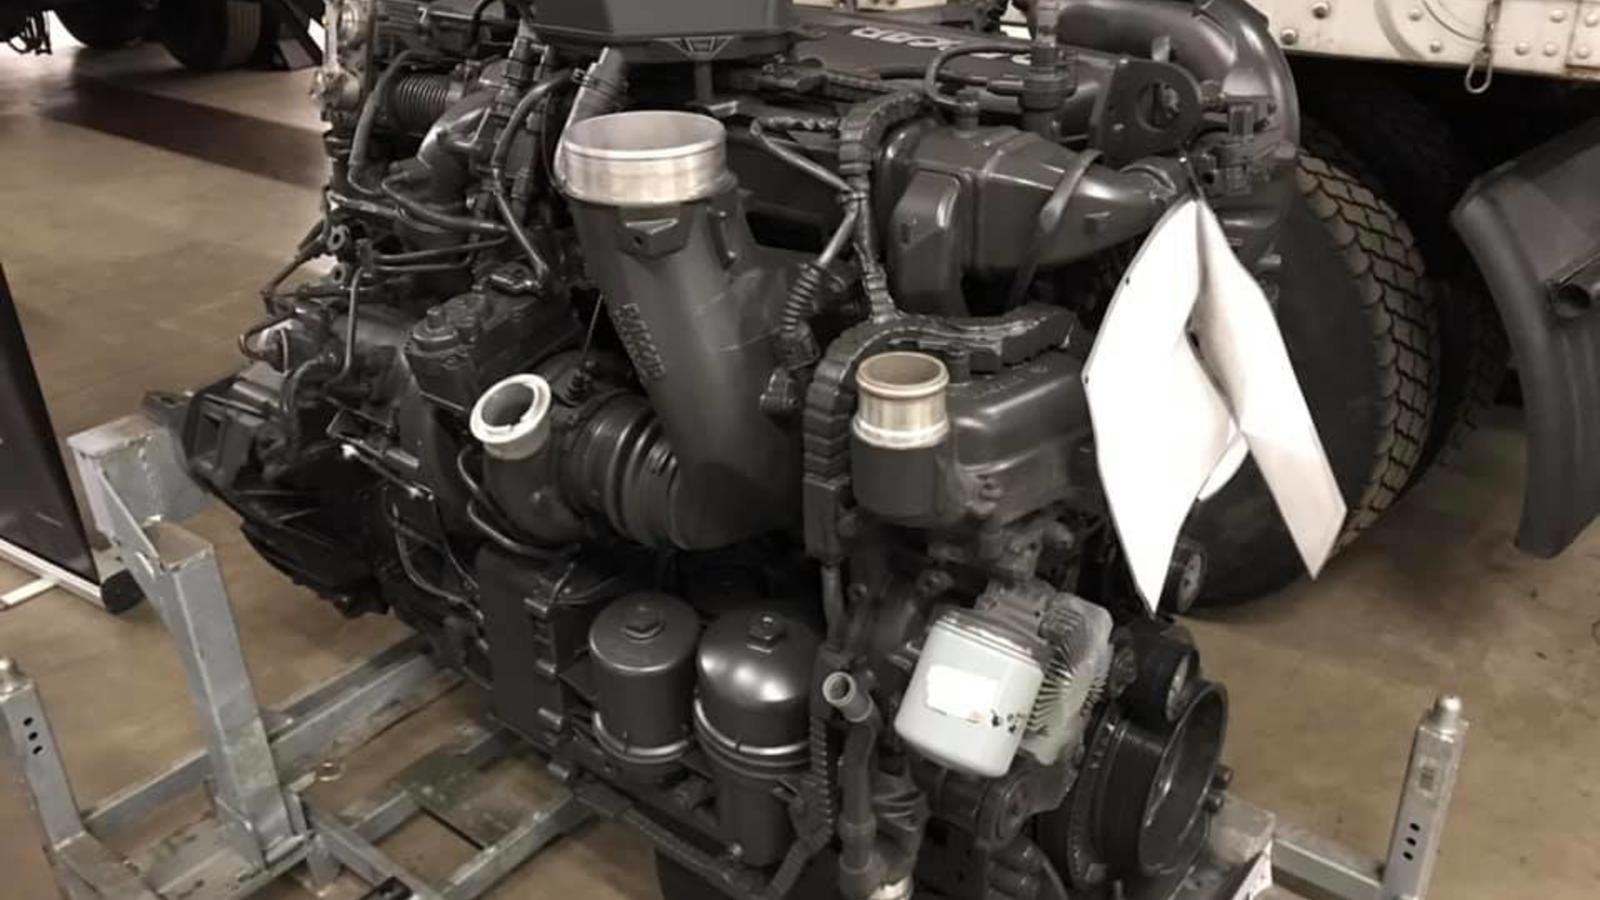 The power specifications of the Paccar’s MX-13 diesel engine is impressive, with 380 to 500 horsepower and 1850 foot pounds of torque.